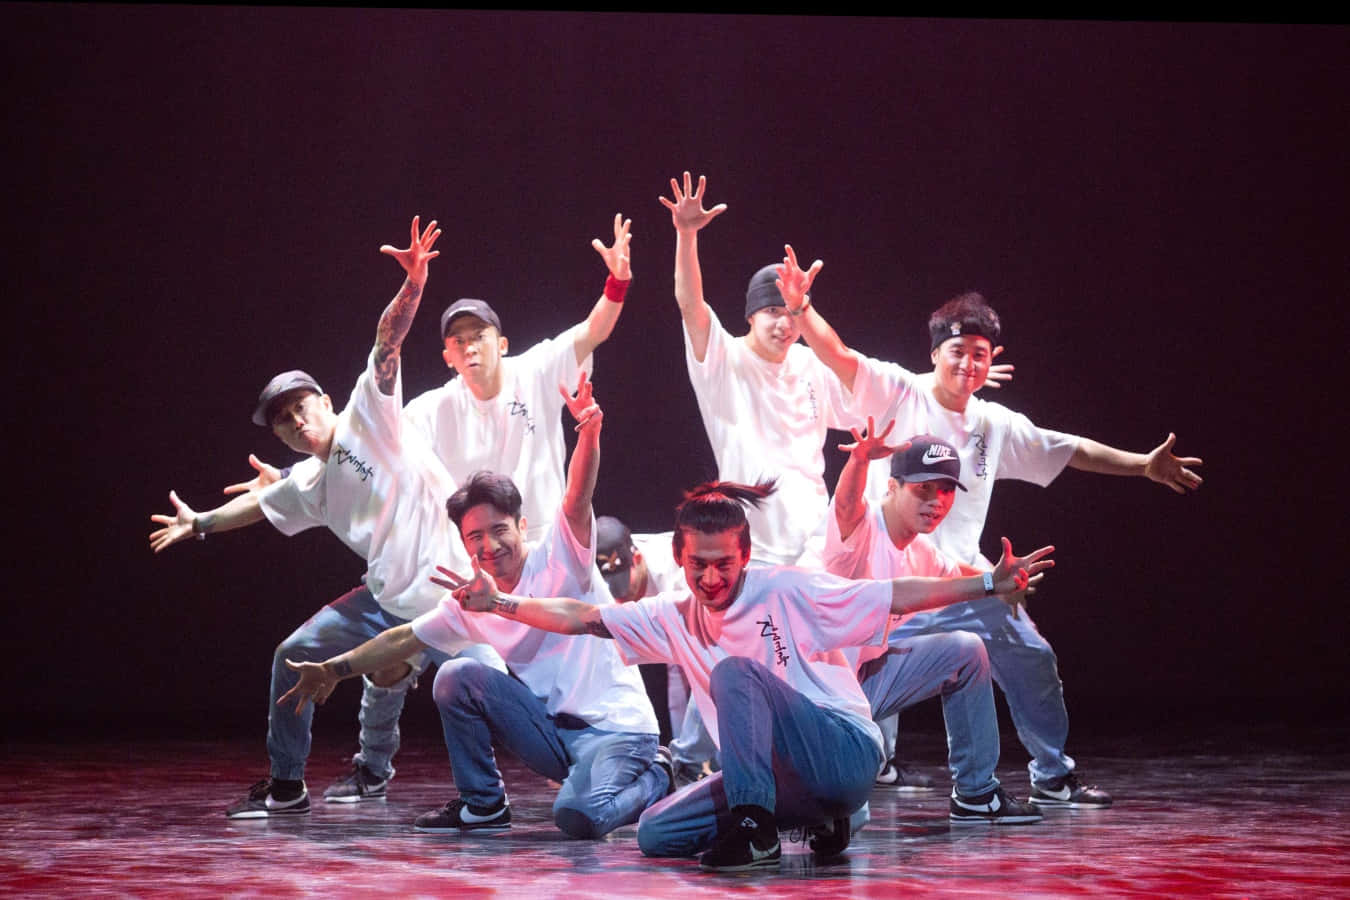 A Group Of Young Men On Stage Performing